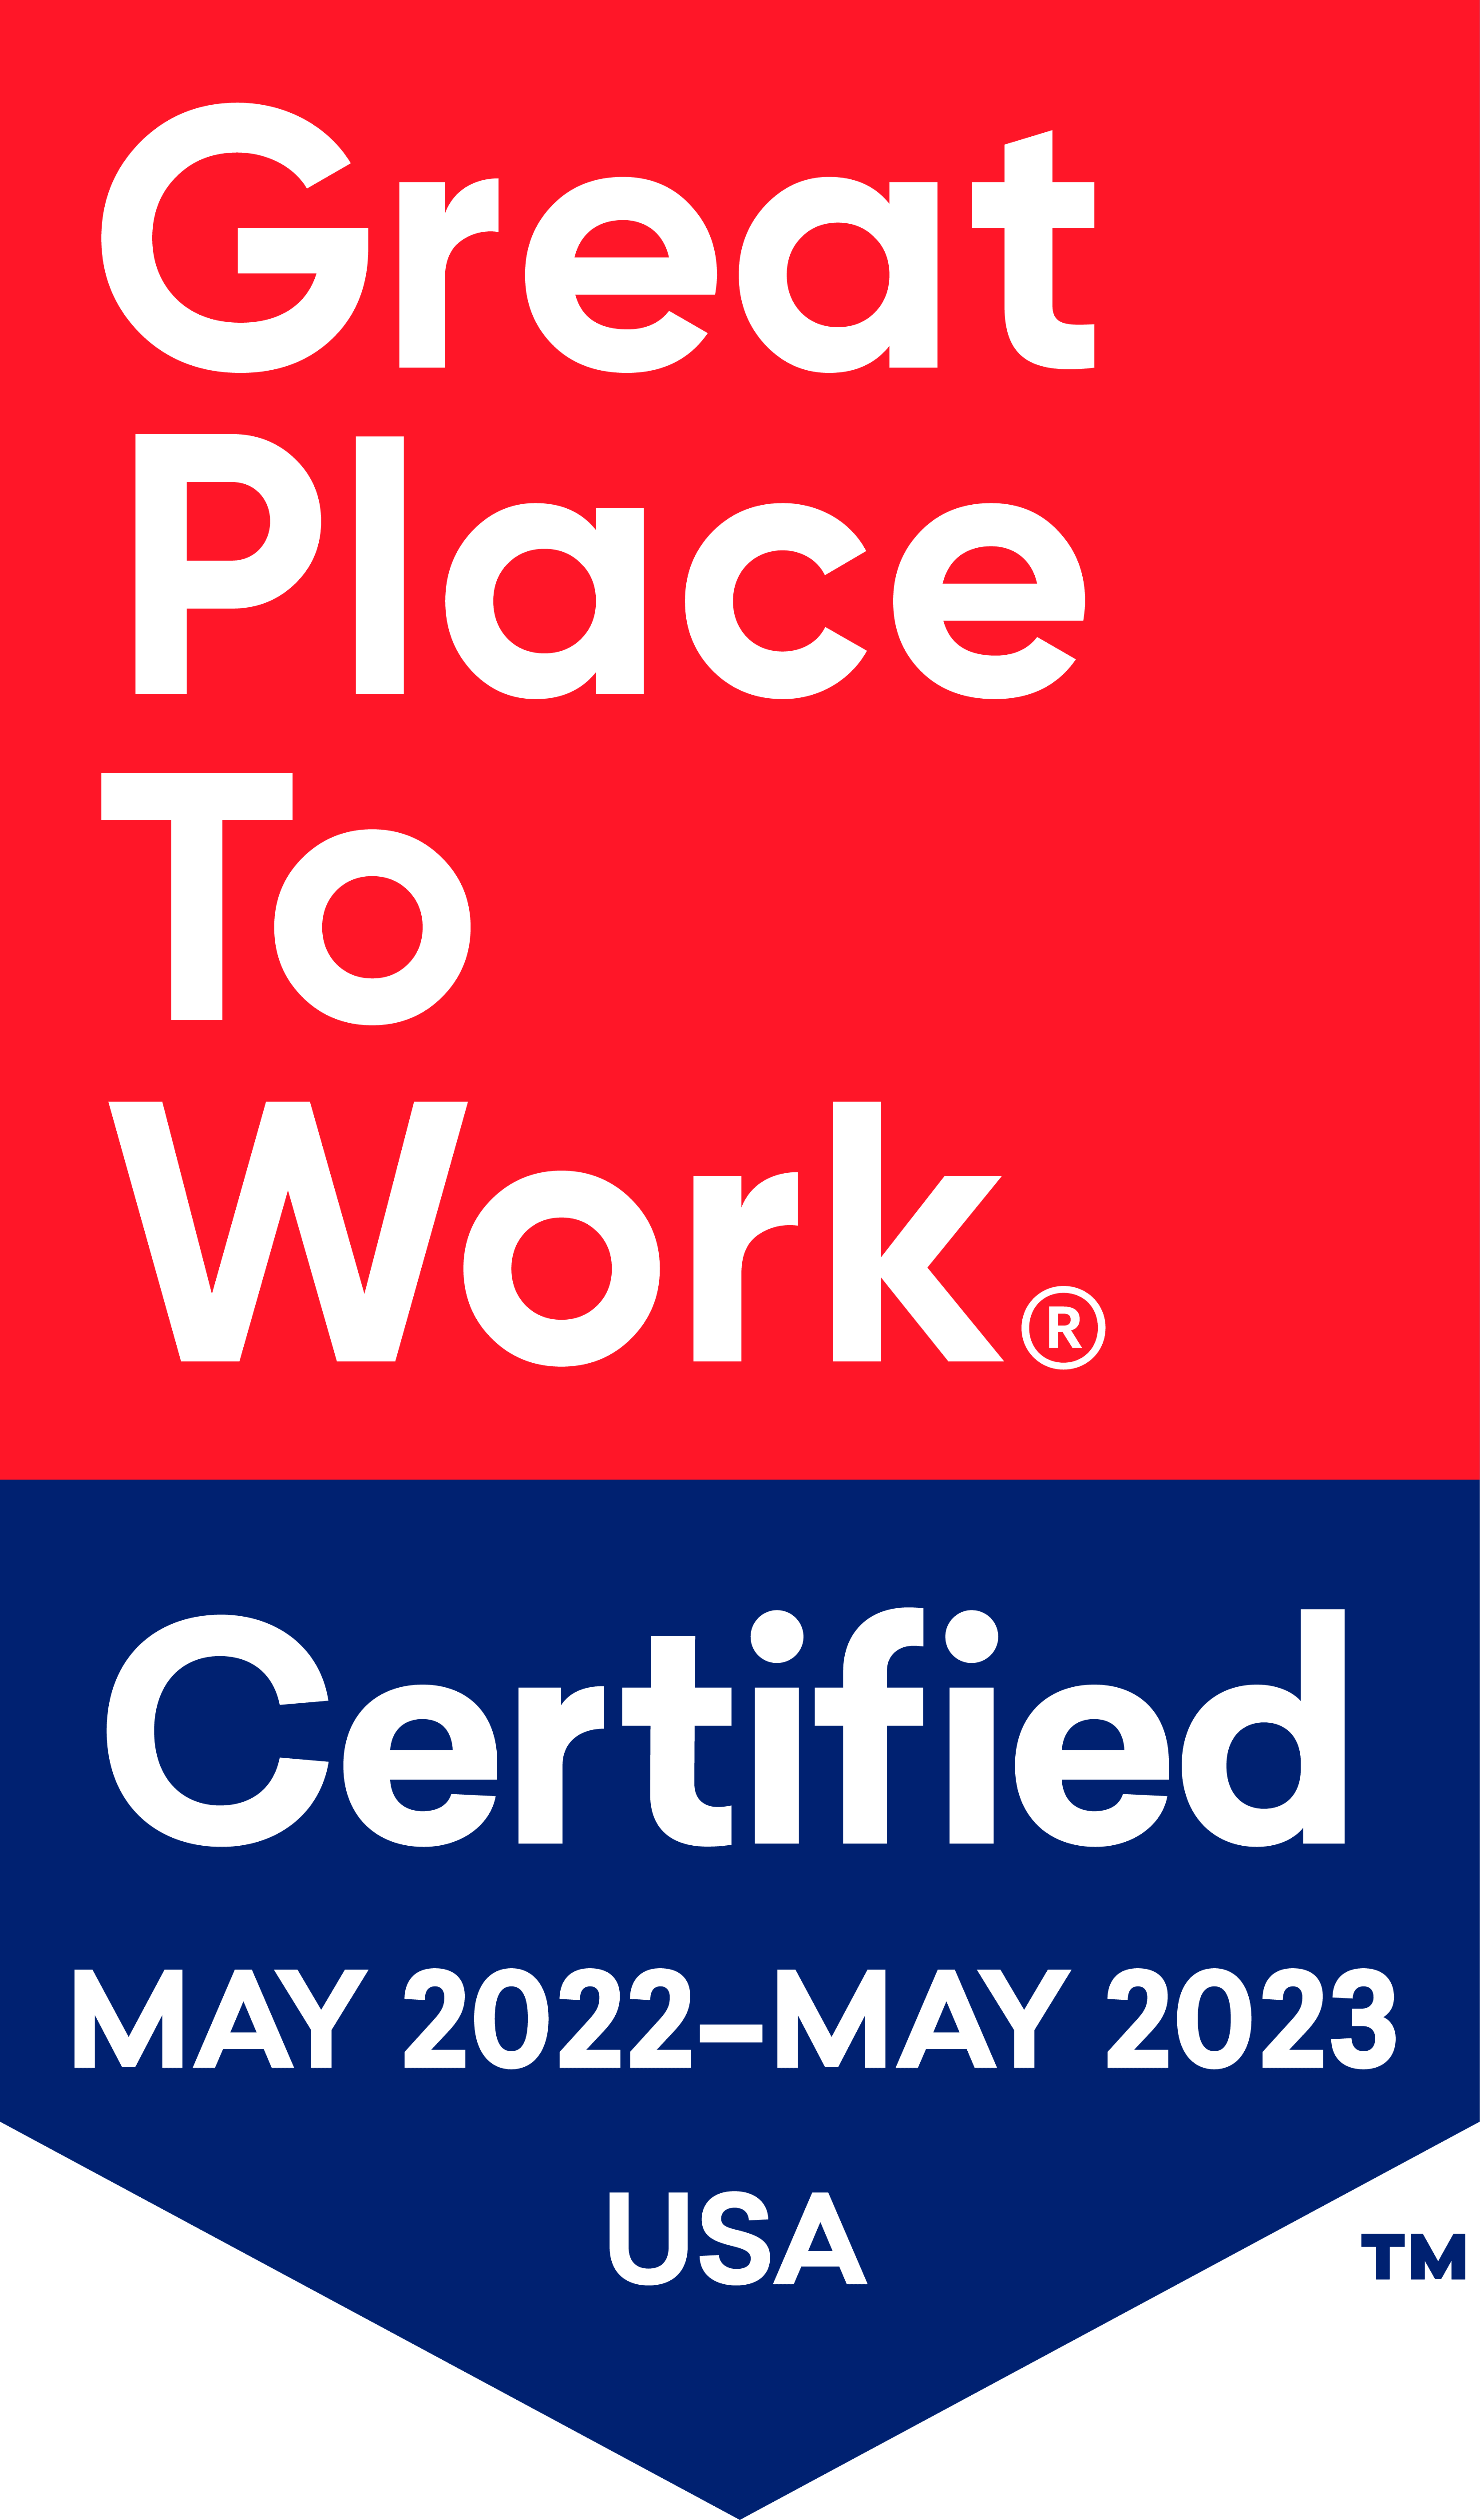 Savanna House is Great Place To Work Certified